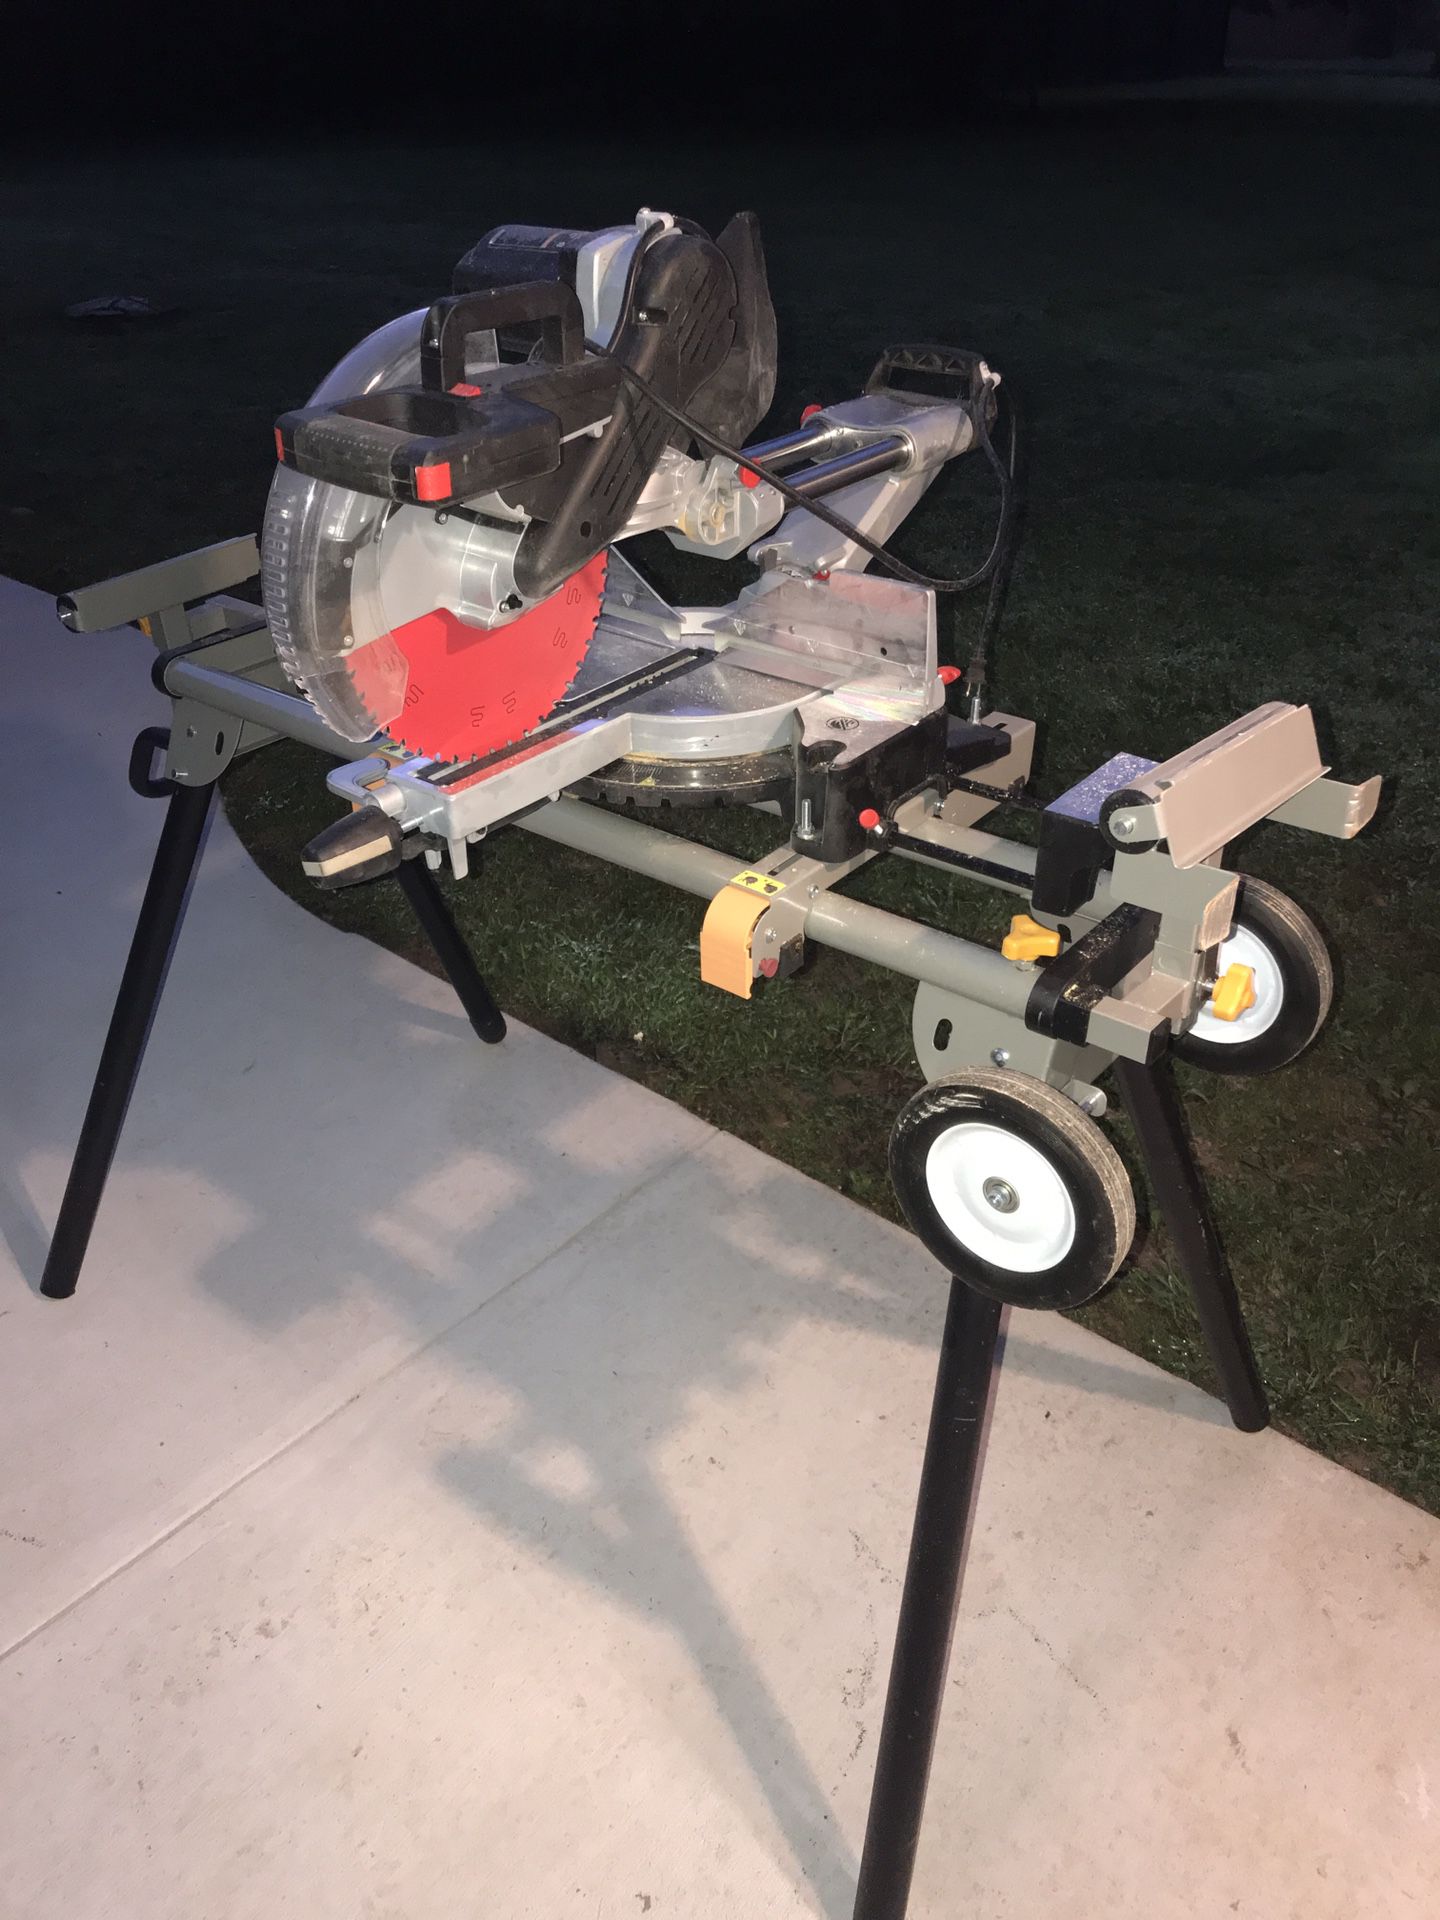 12” Duel Bevel Compound Miter Saw With Folding Table